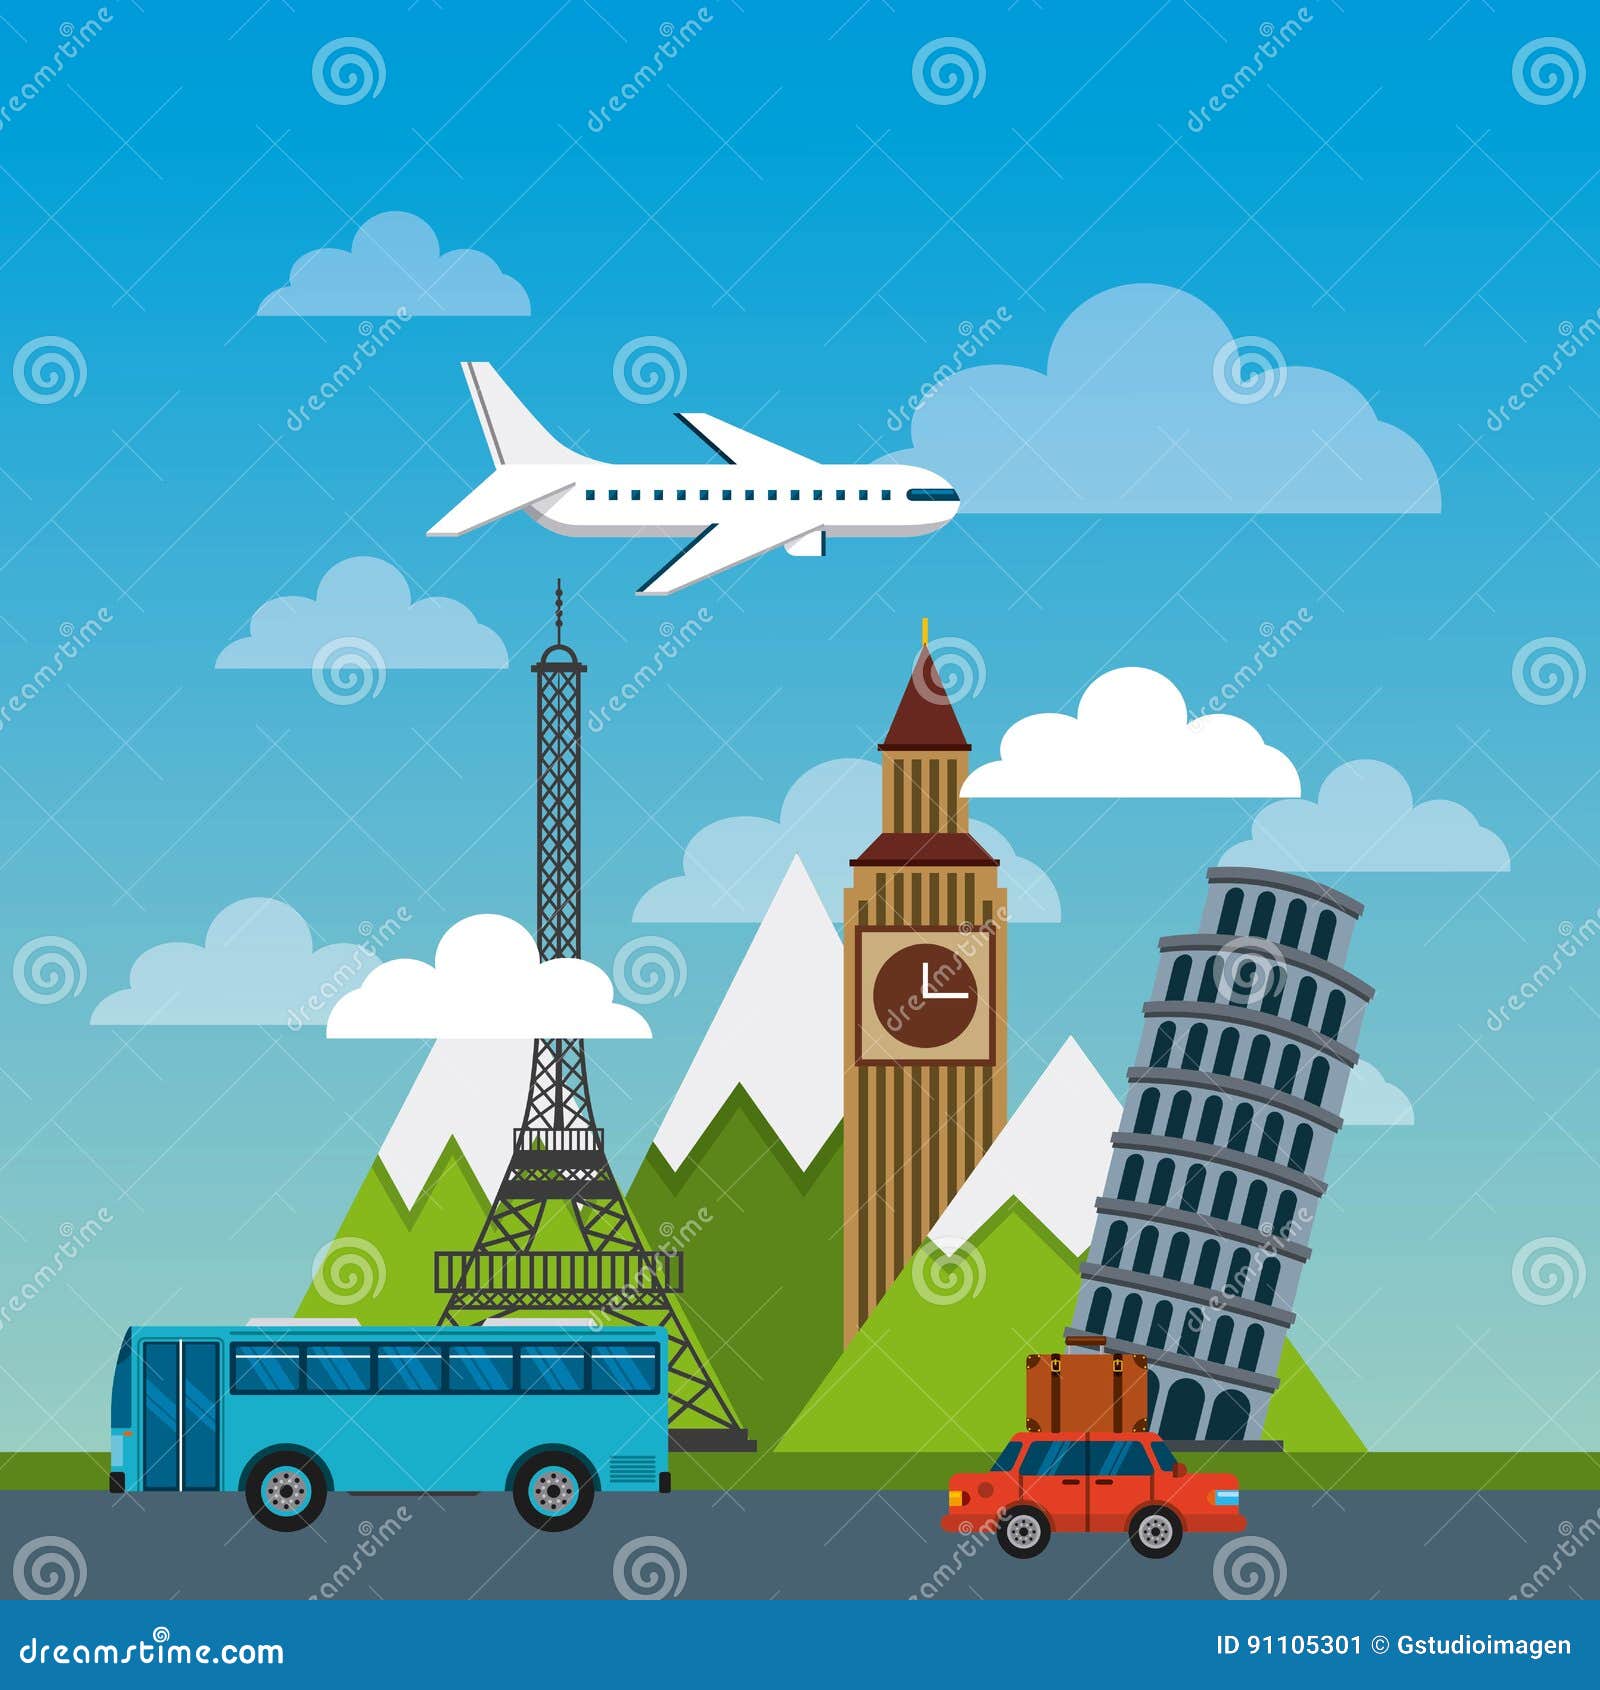 Travel and tourism design stock vector. Illustration of flight - 91105301